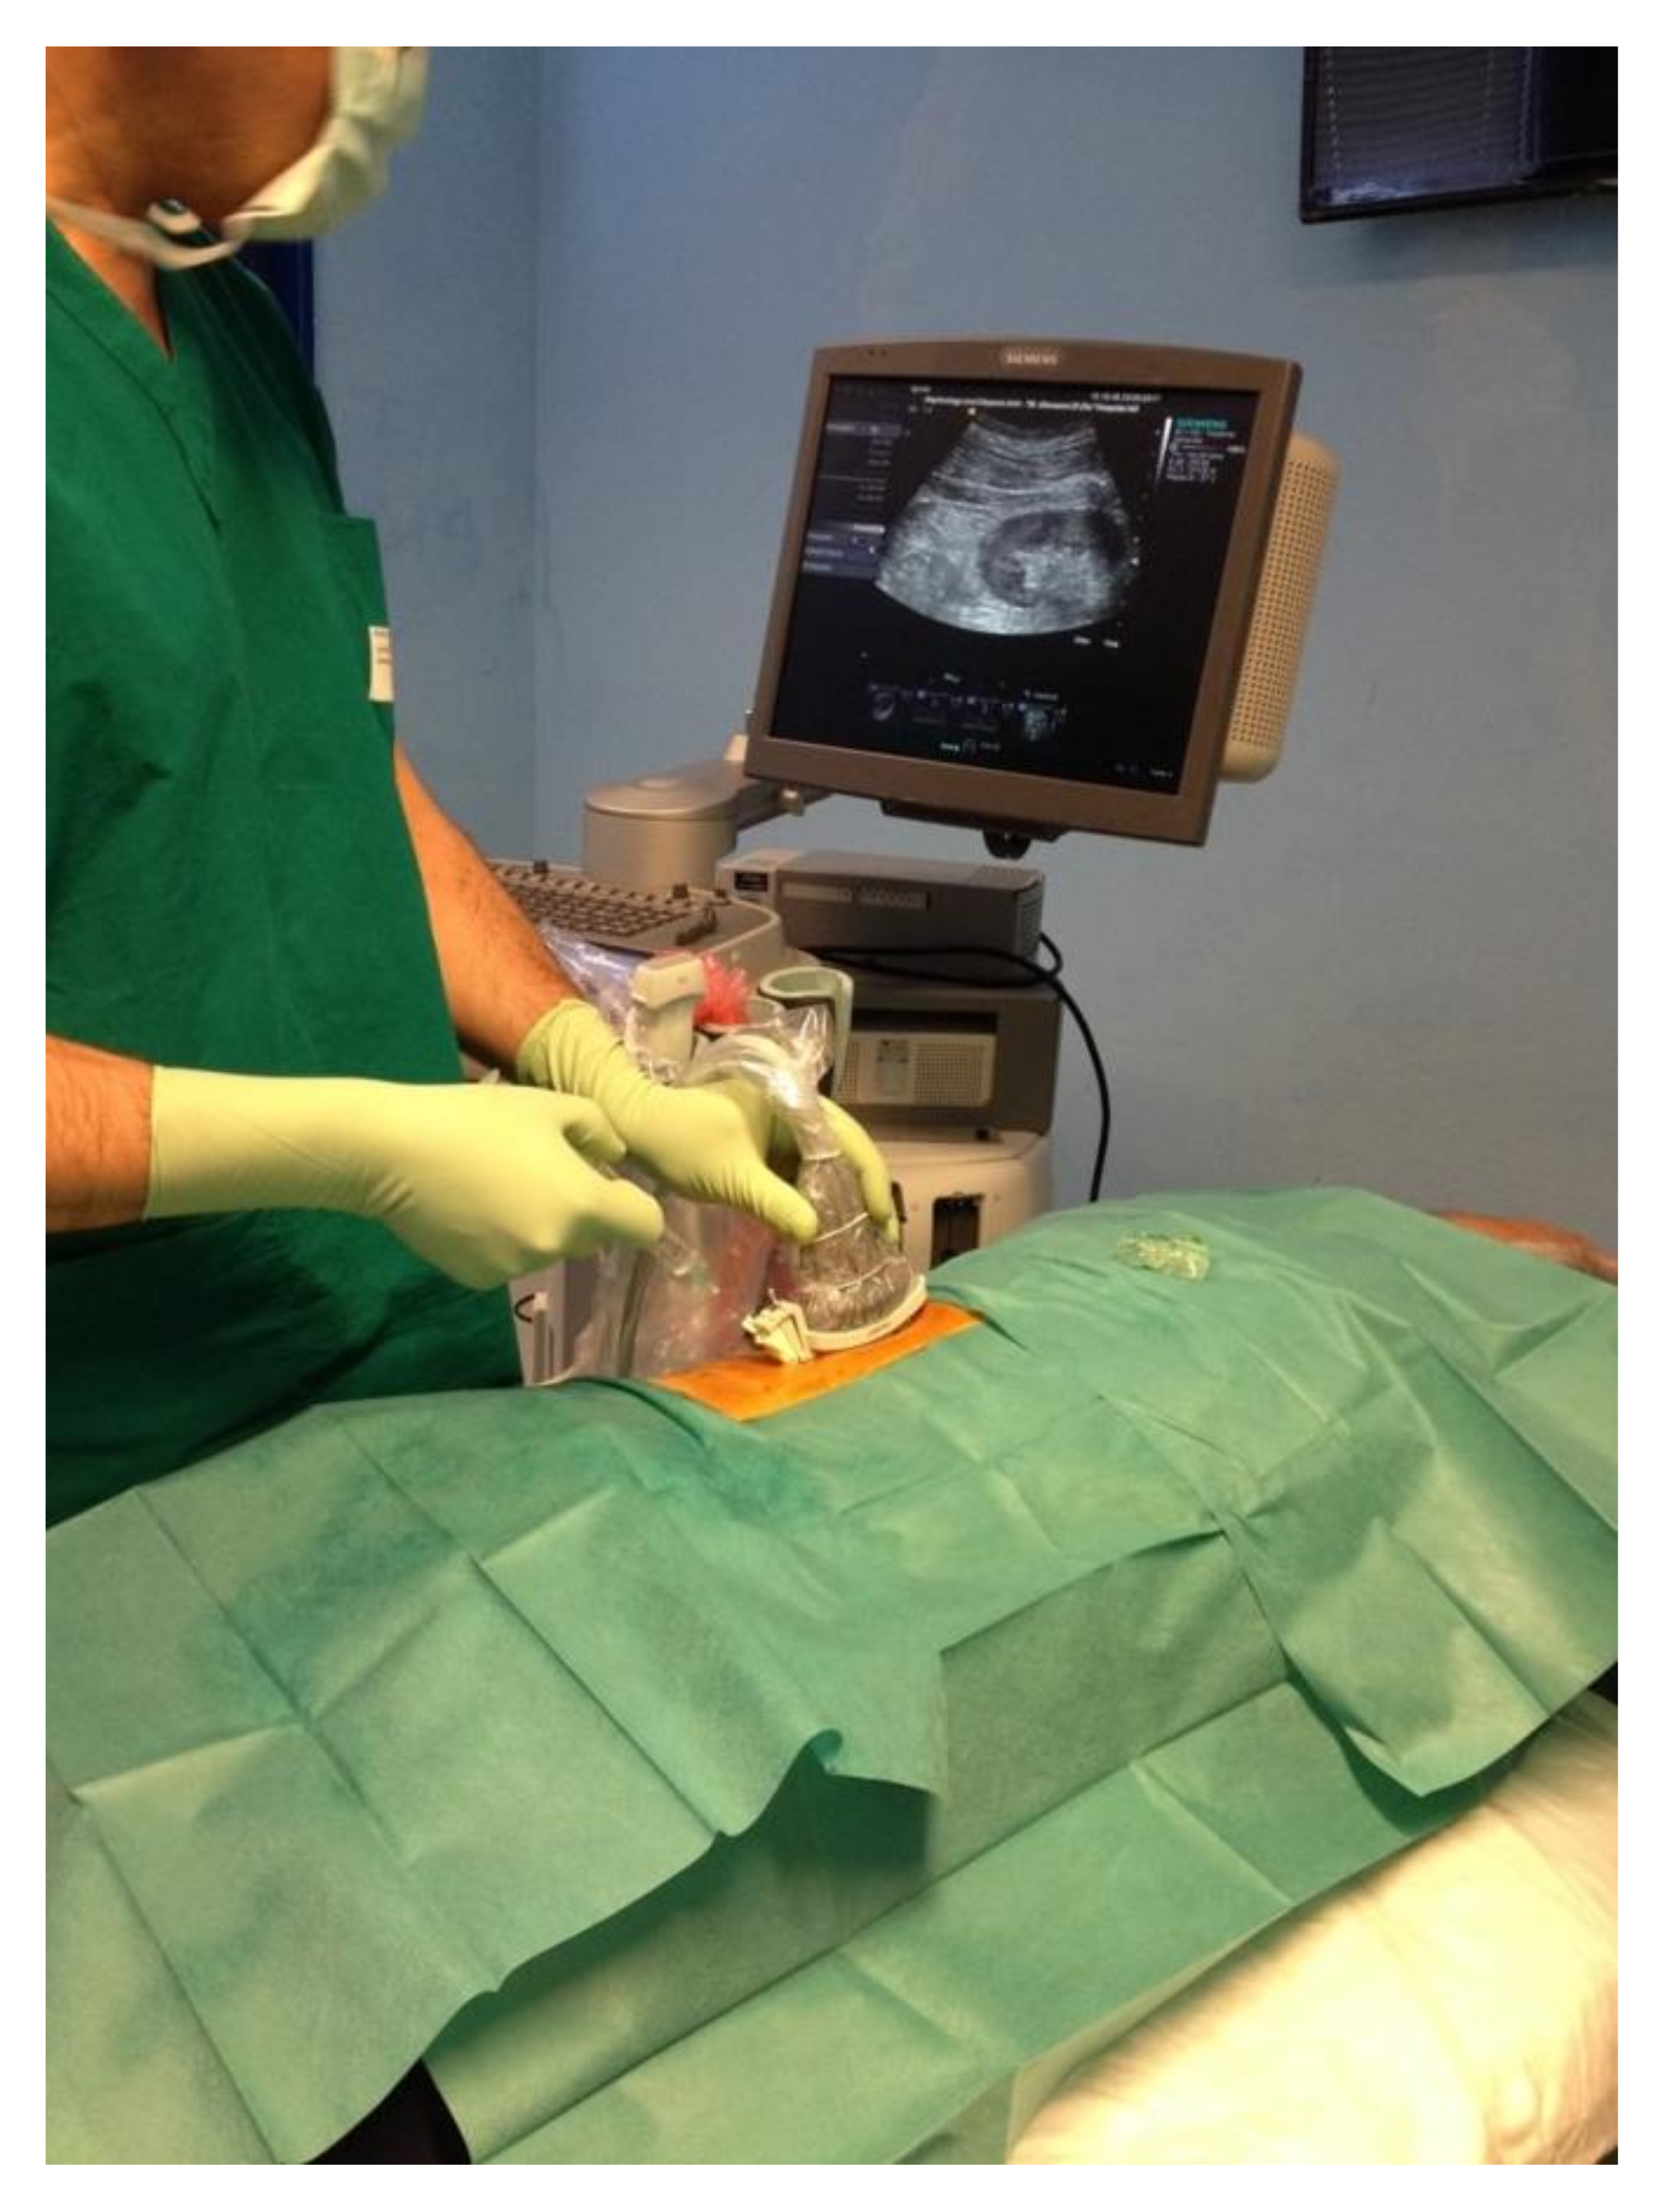 kidney cyst ultrasound and biopsy procedure